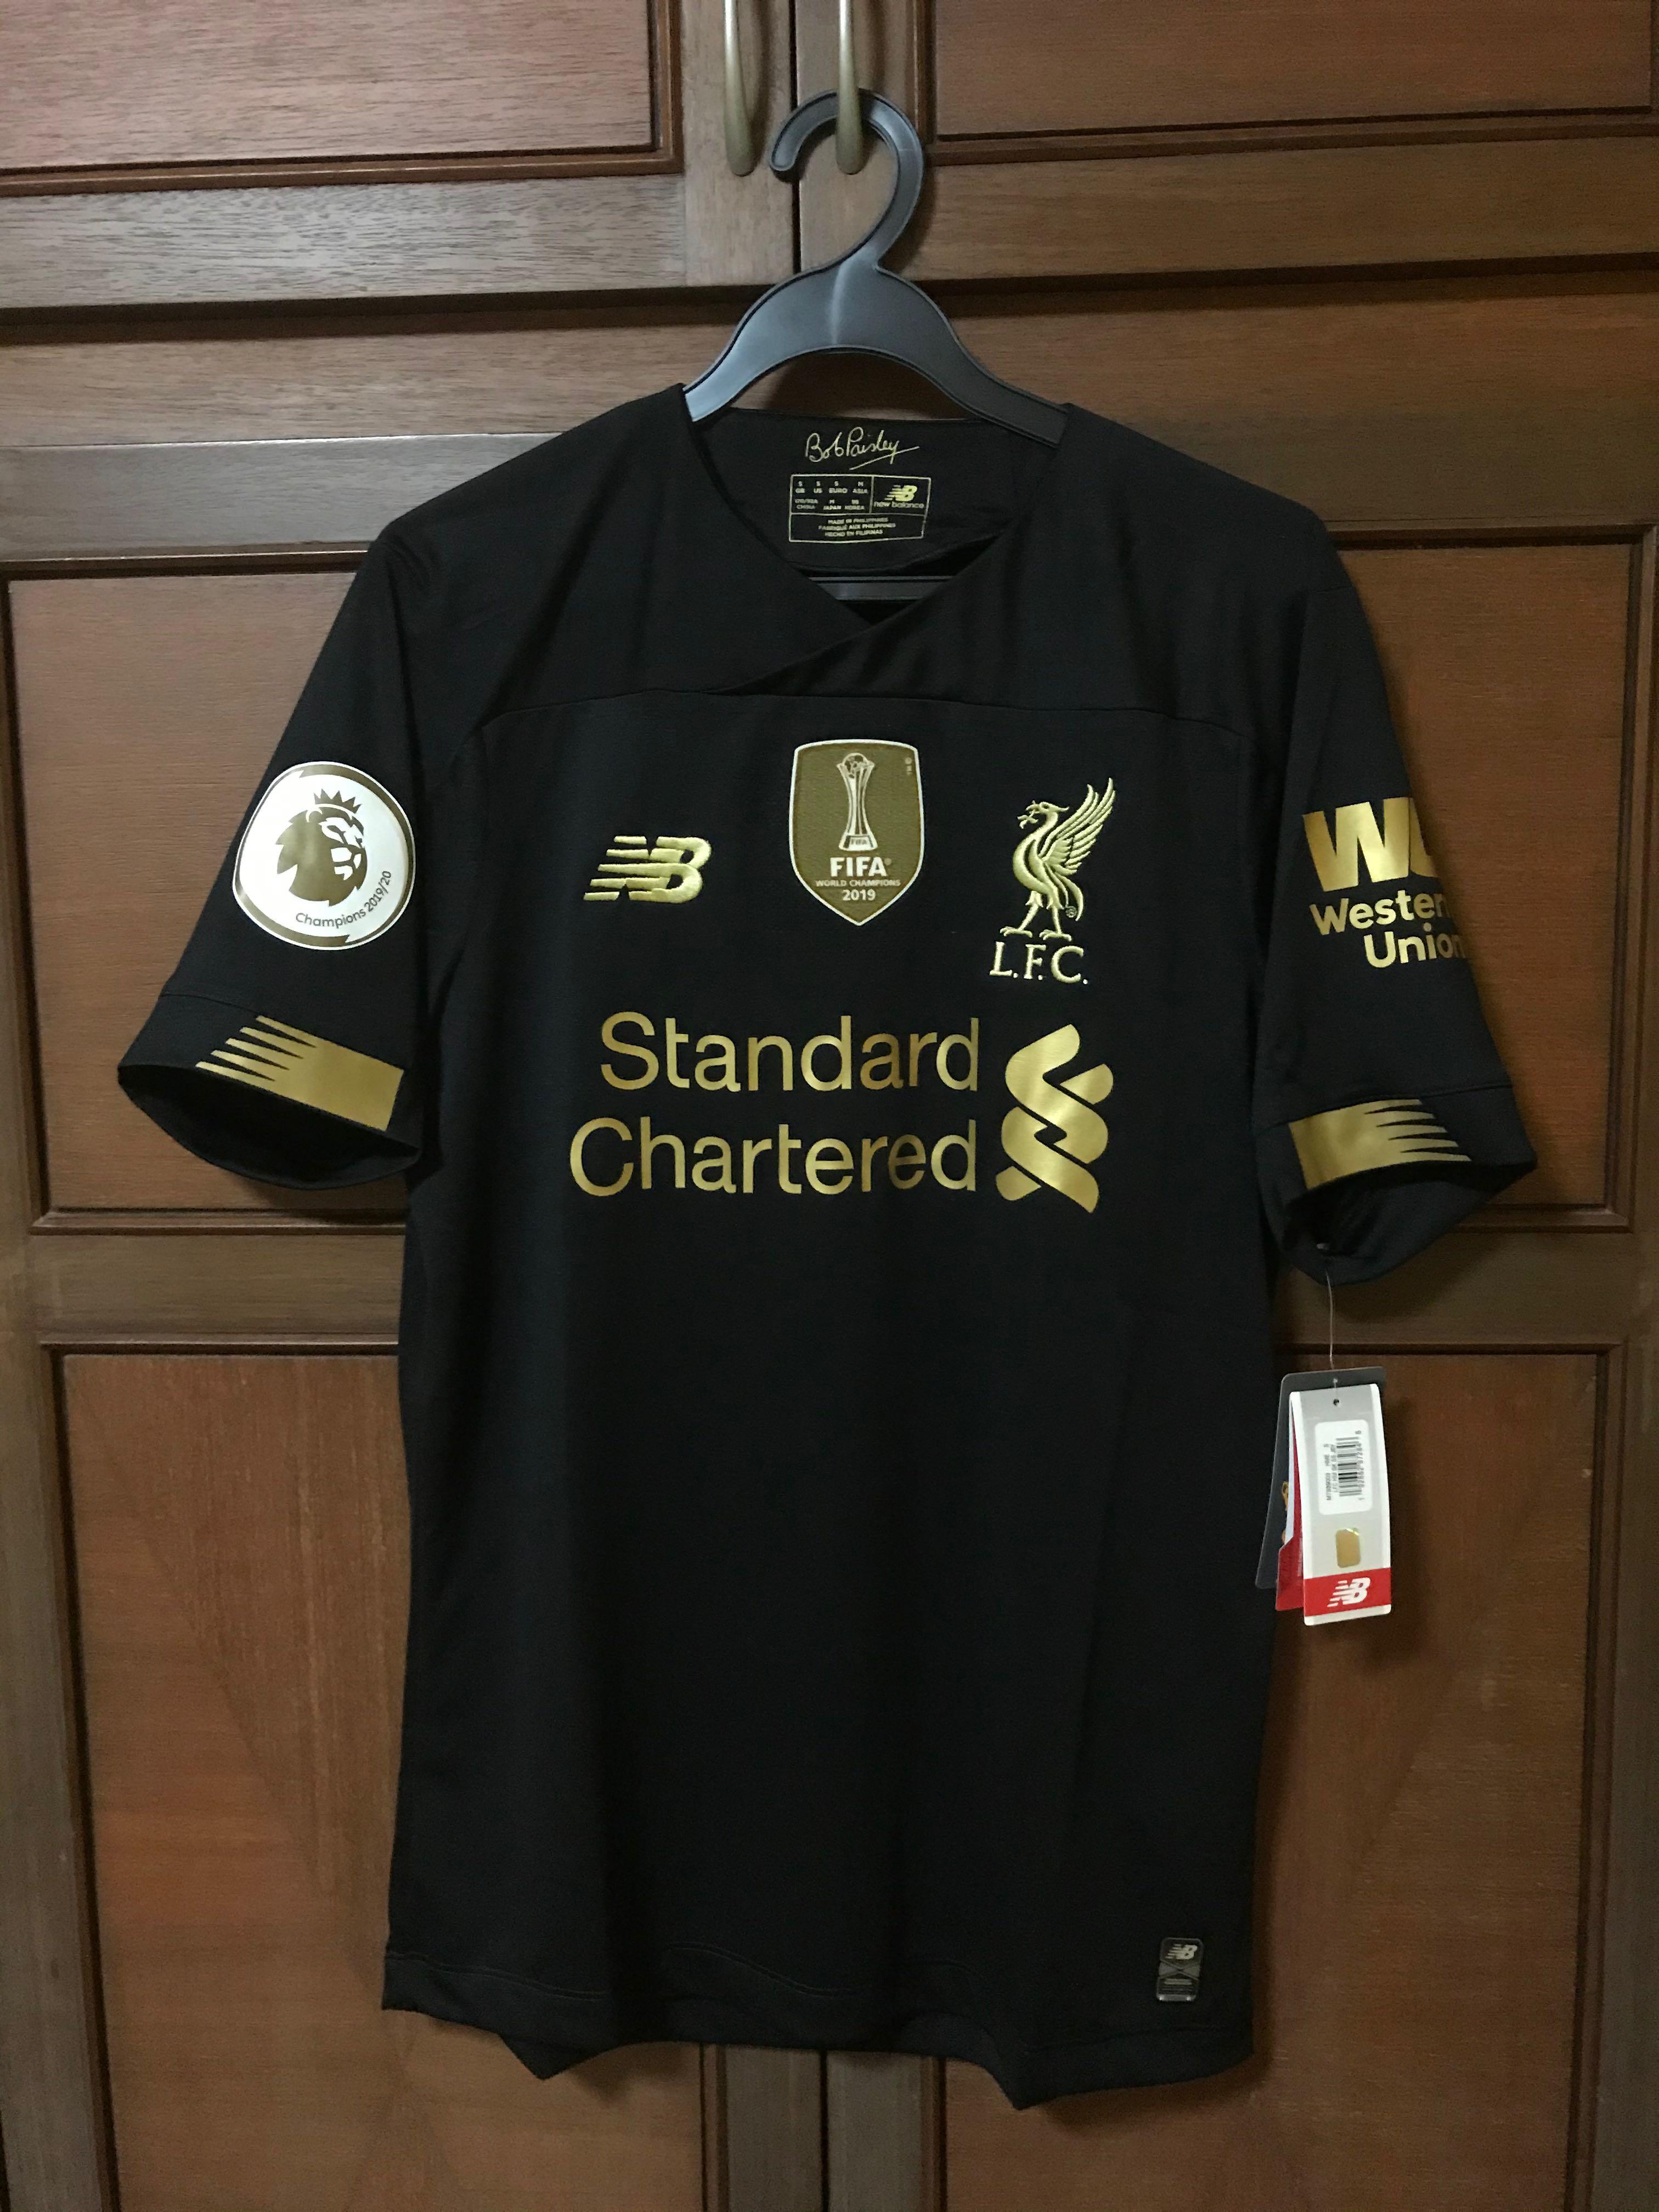 liverpool black and gold jersey